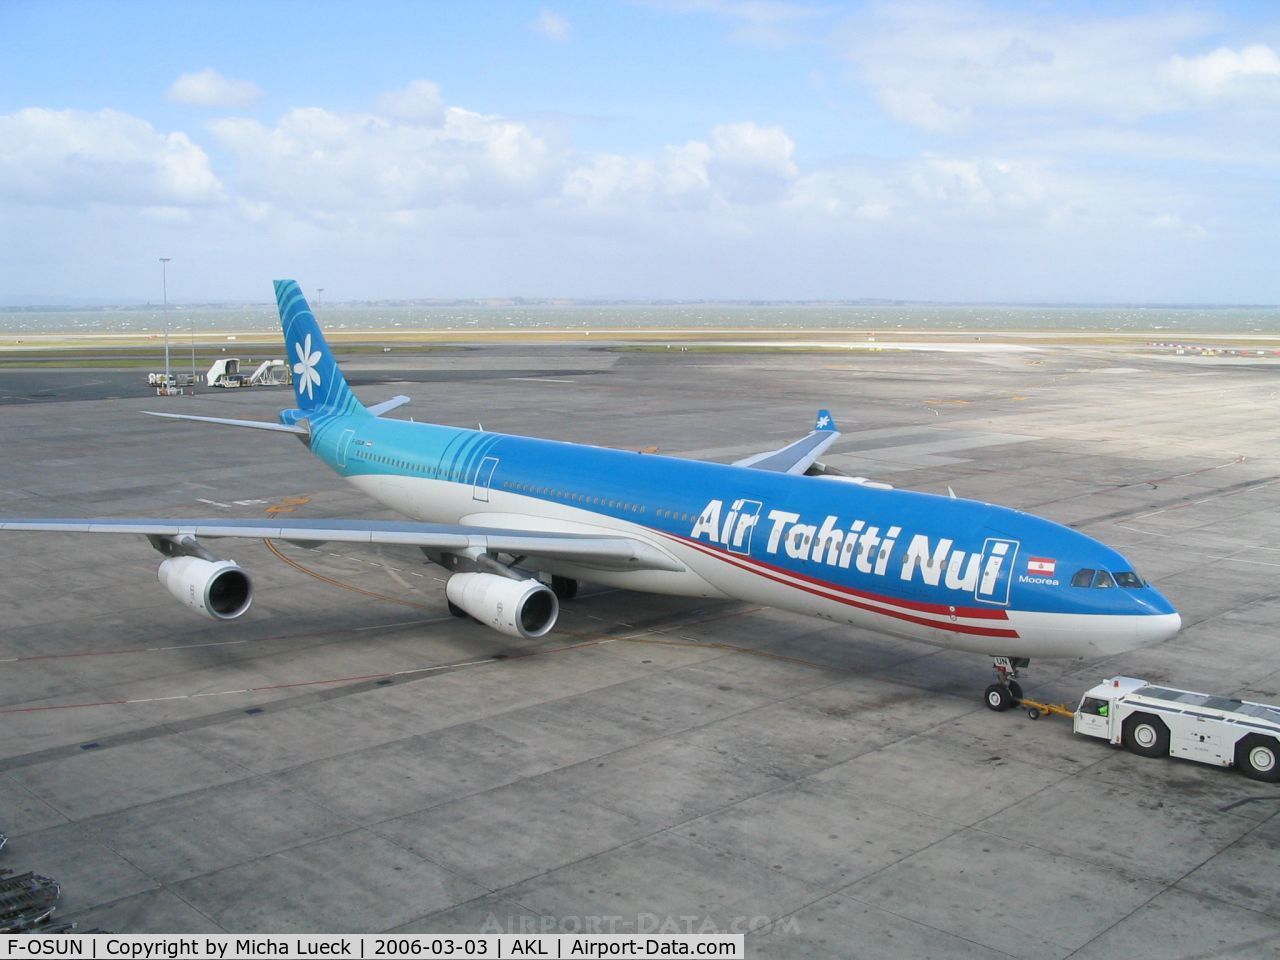 F-OSUN, 2001 Airbus A340-313 C/N 446, Air Tahiti Nui's livery is one of the most beautiful colour schemes in the sky